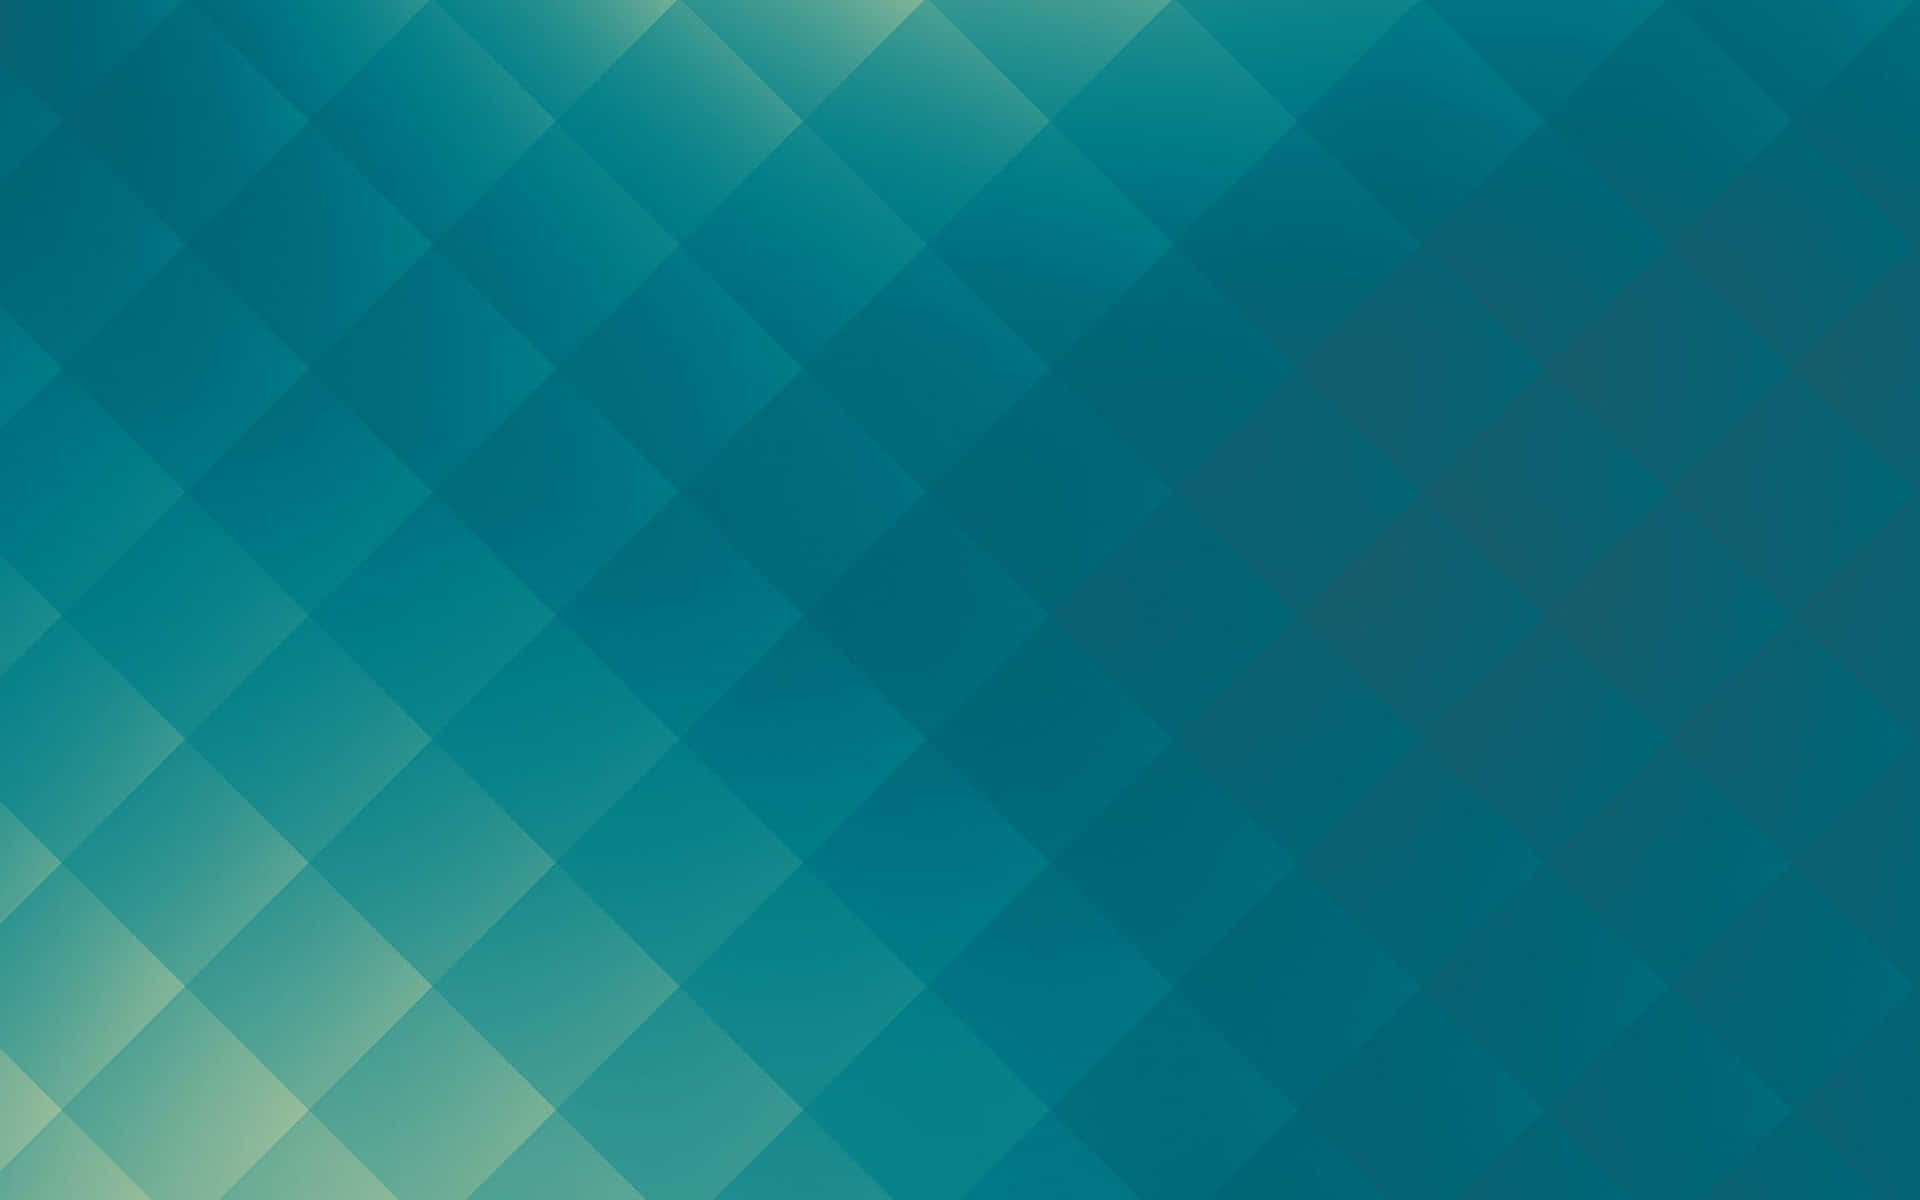 Cute Teal Turquoise Cubes Gradient Background